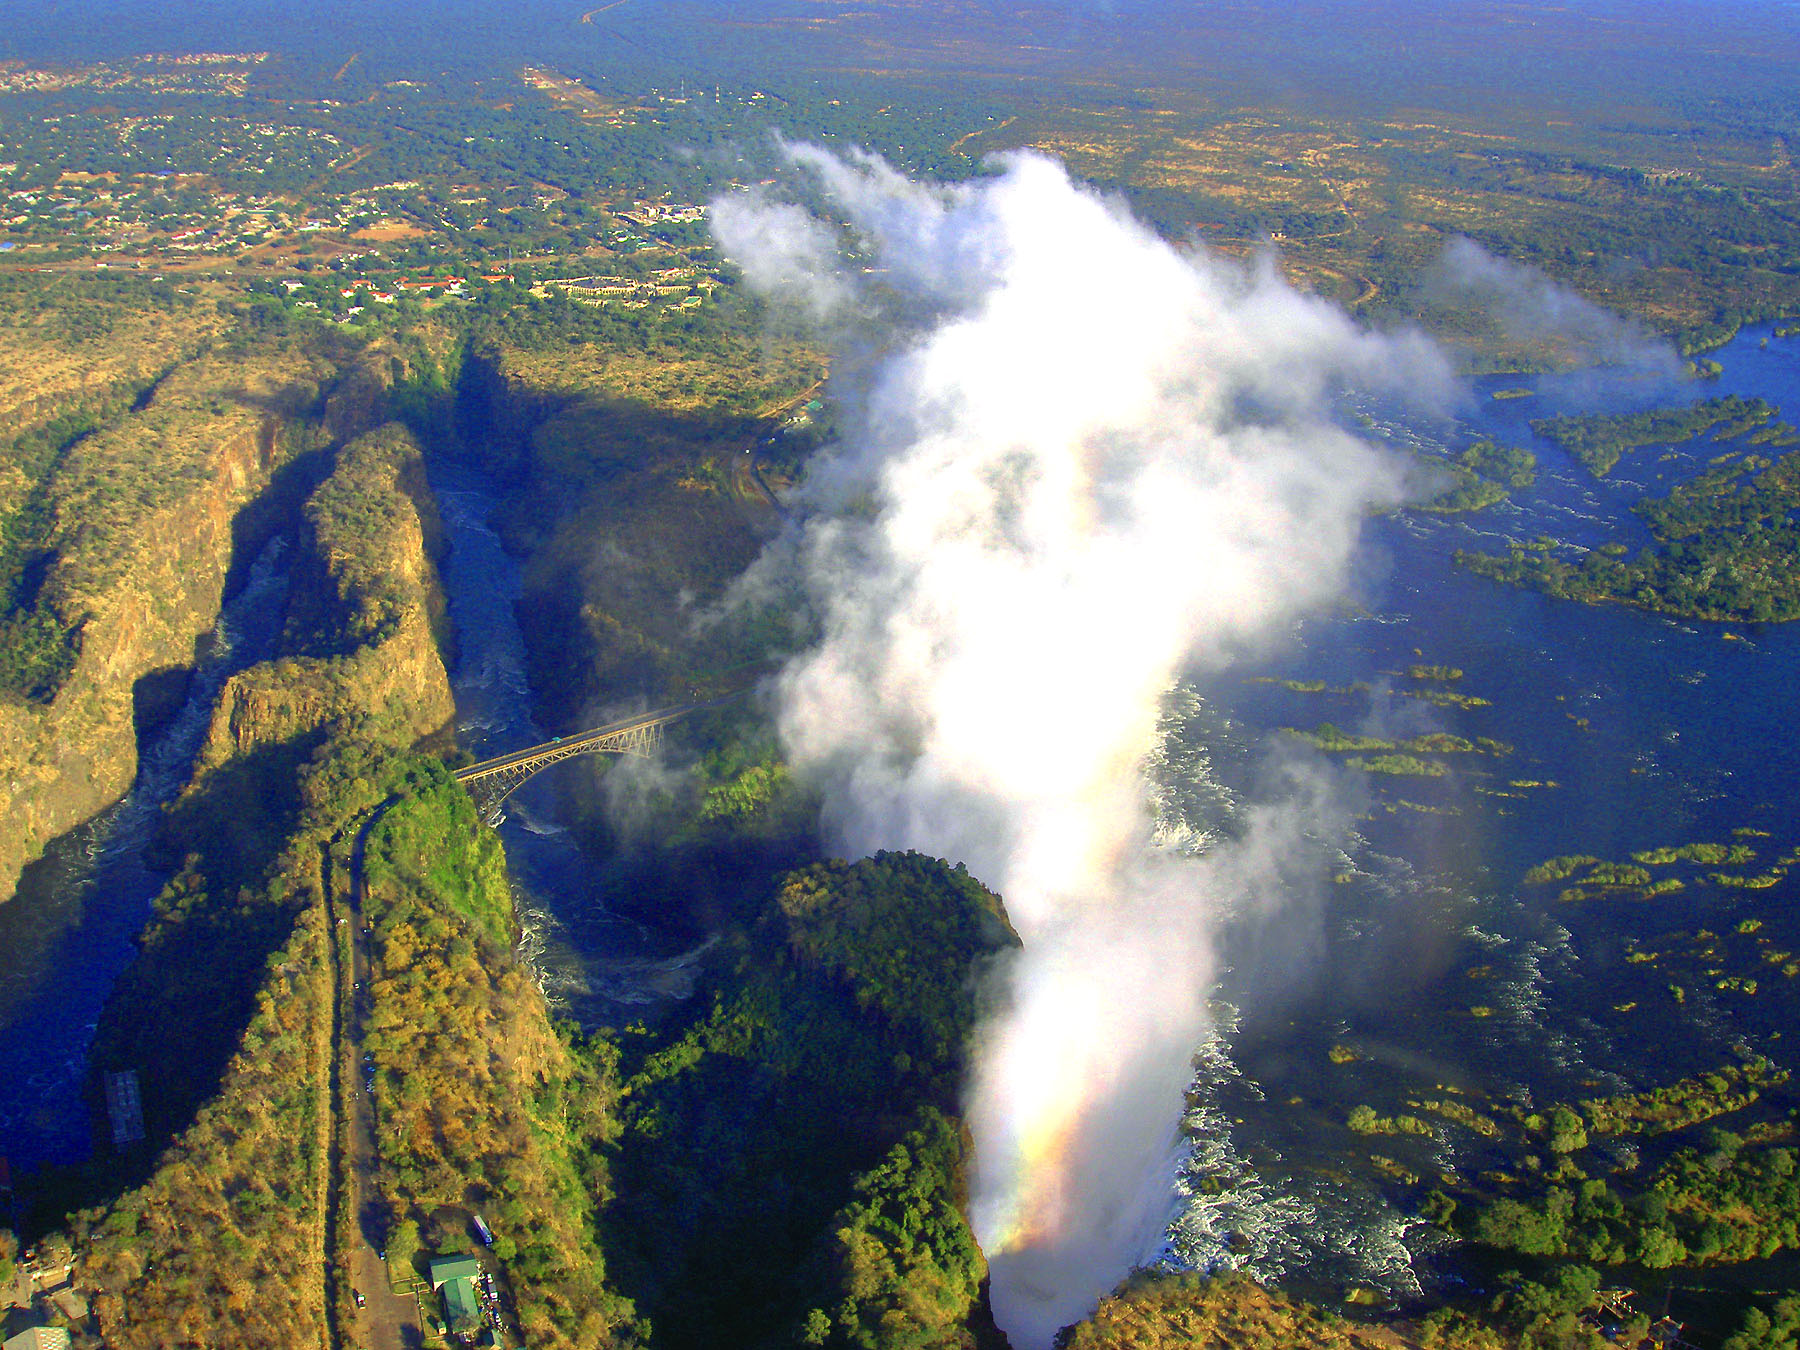 Zambia - Victoria Falls Helicopter View 4.jpg